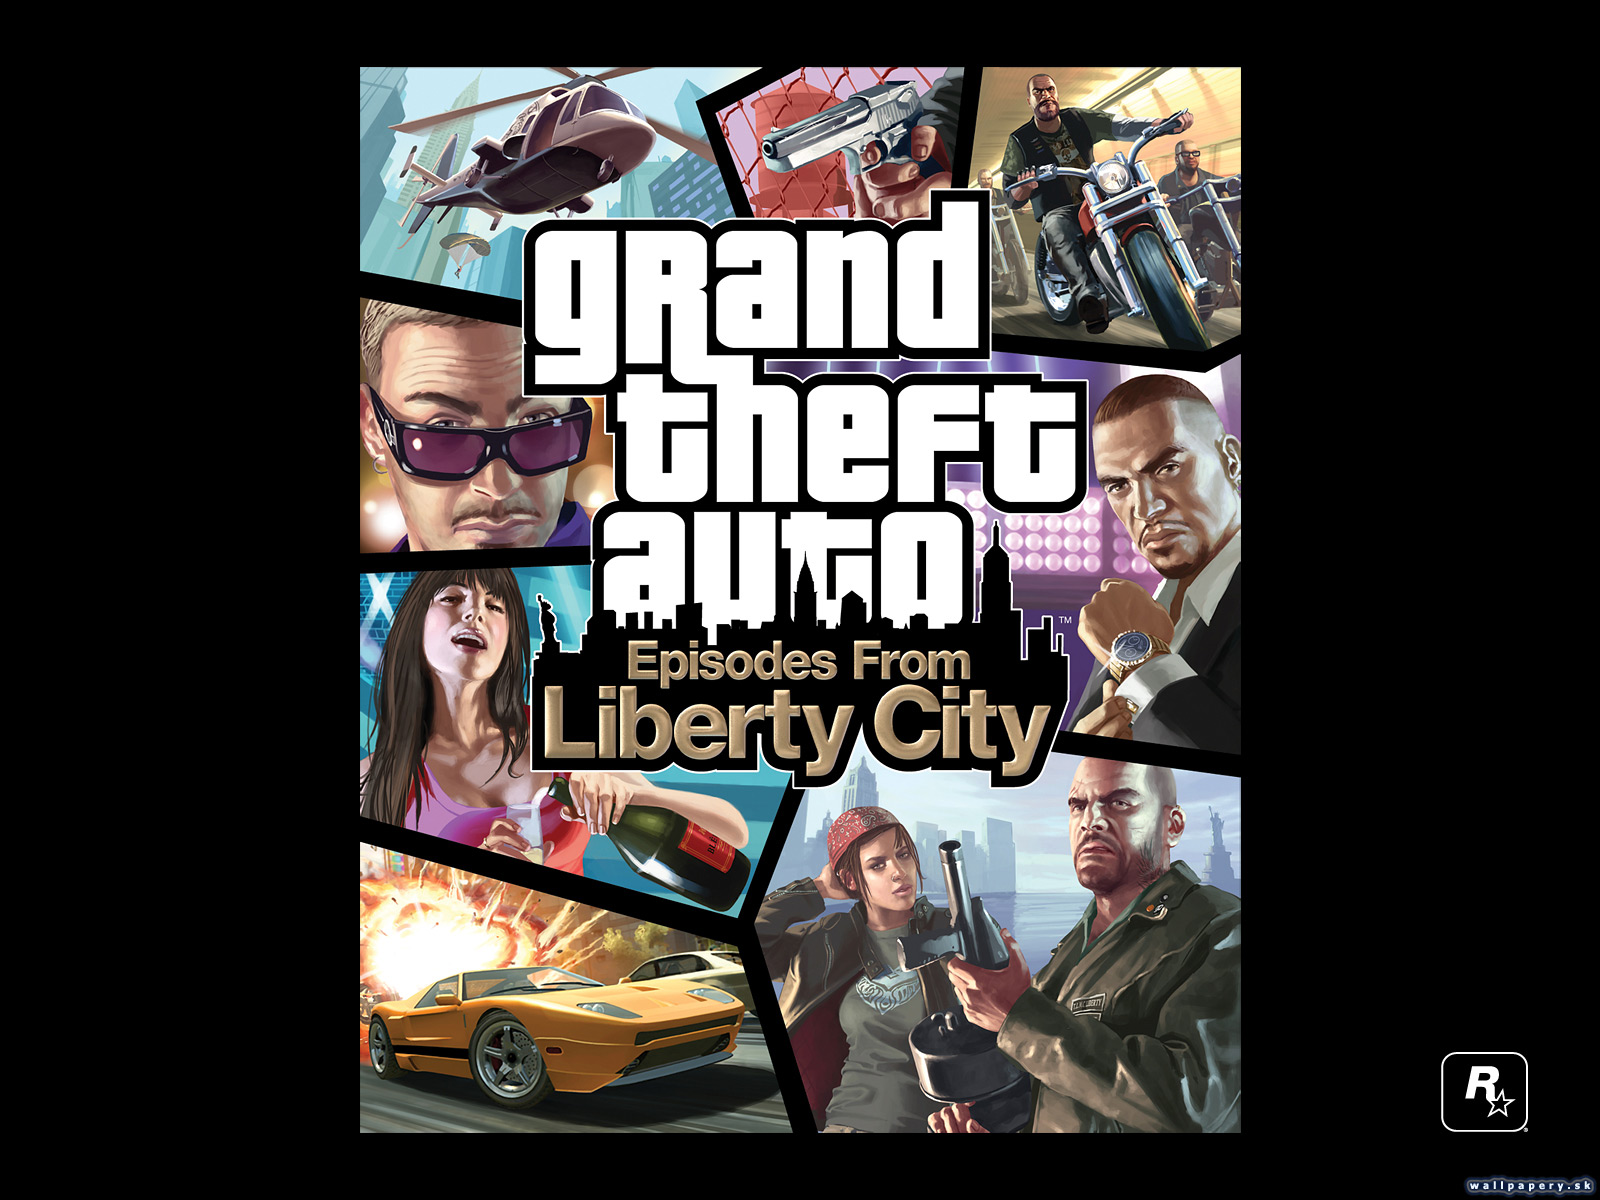 Grand Theft Auto IV: Episodes From Liberty City - wallpaper 2